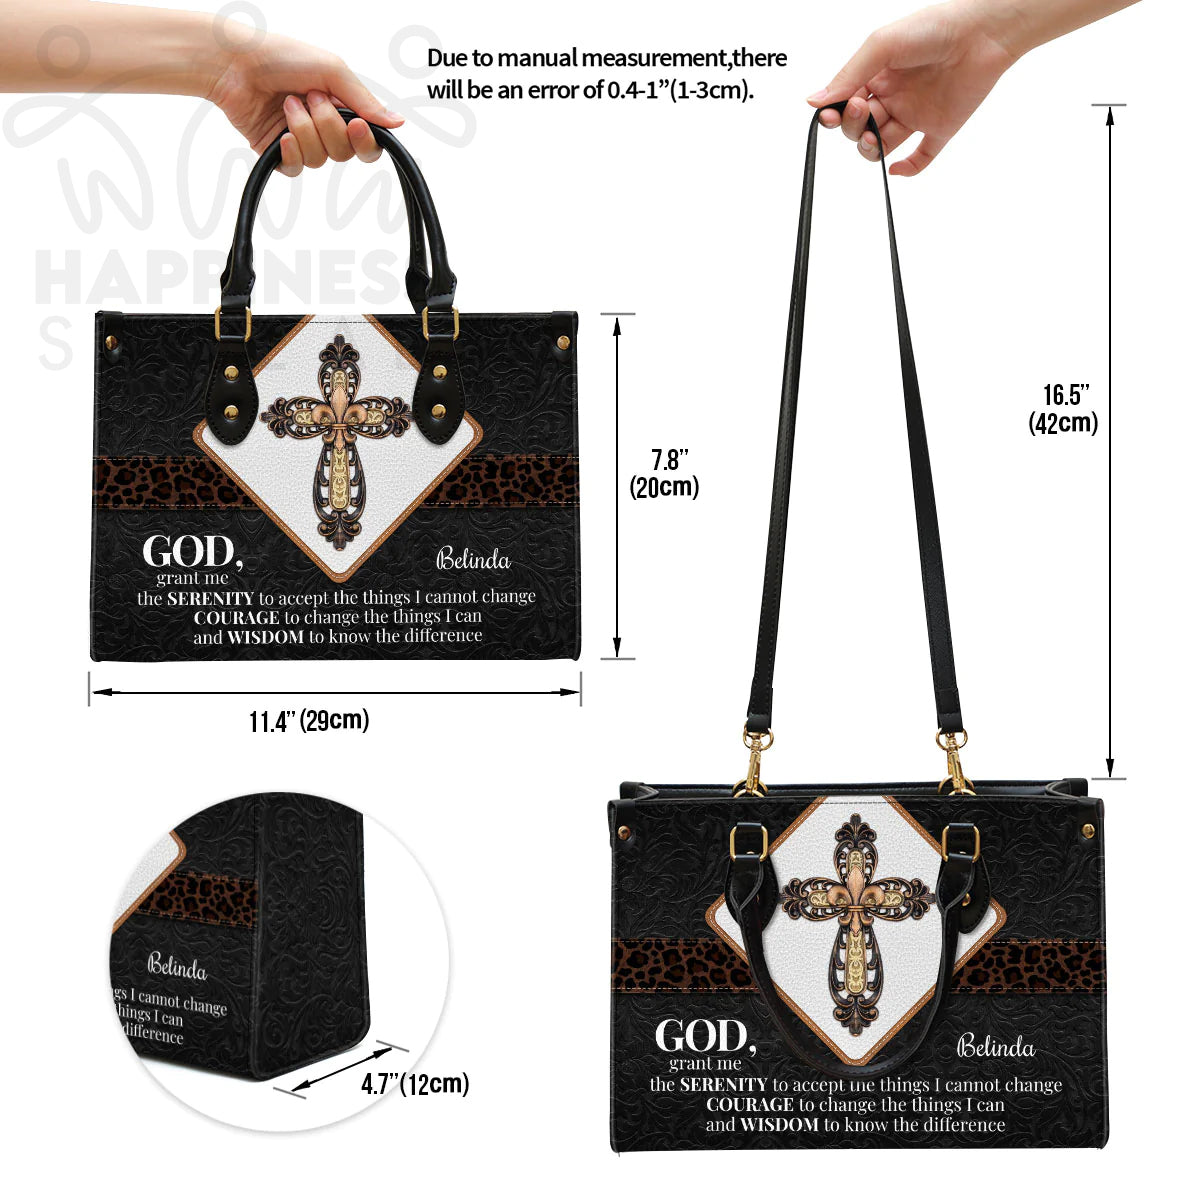 Christianart Personalized Leather Tote Bag